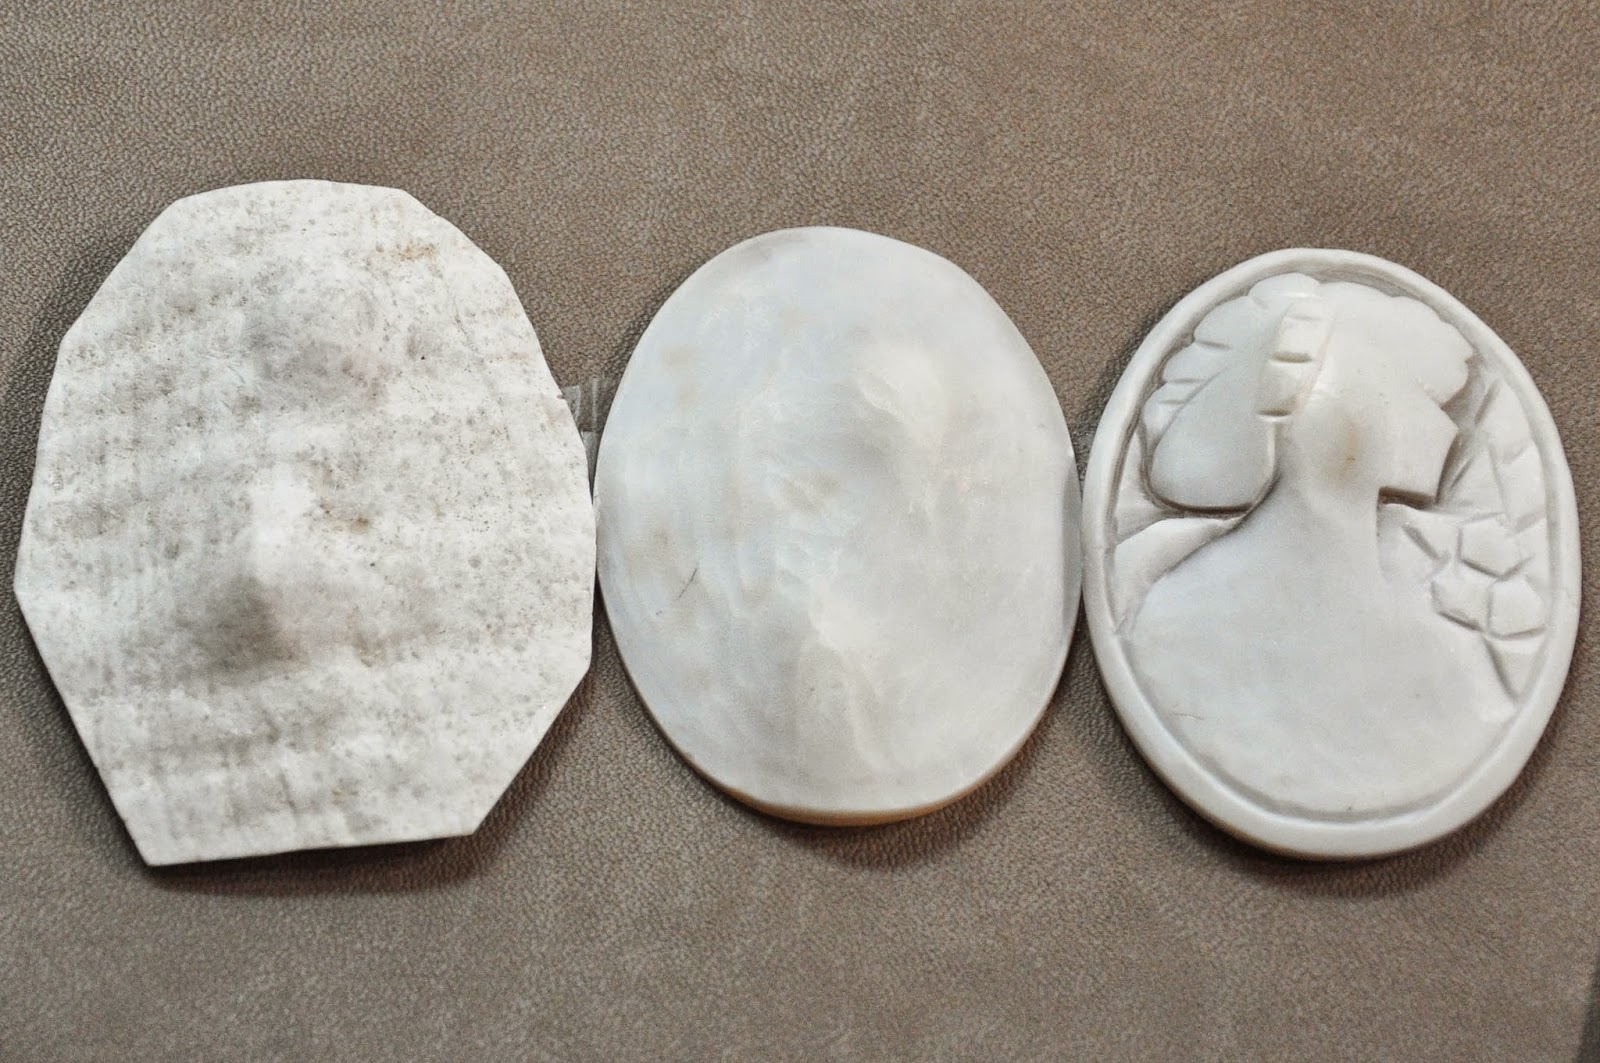 The different stages of cameo carving